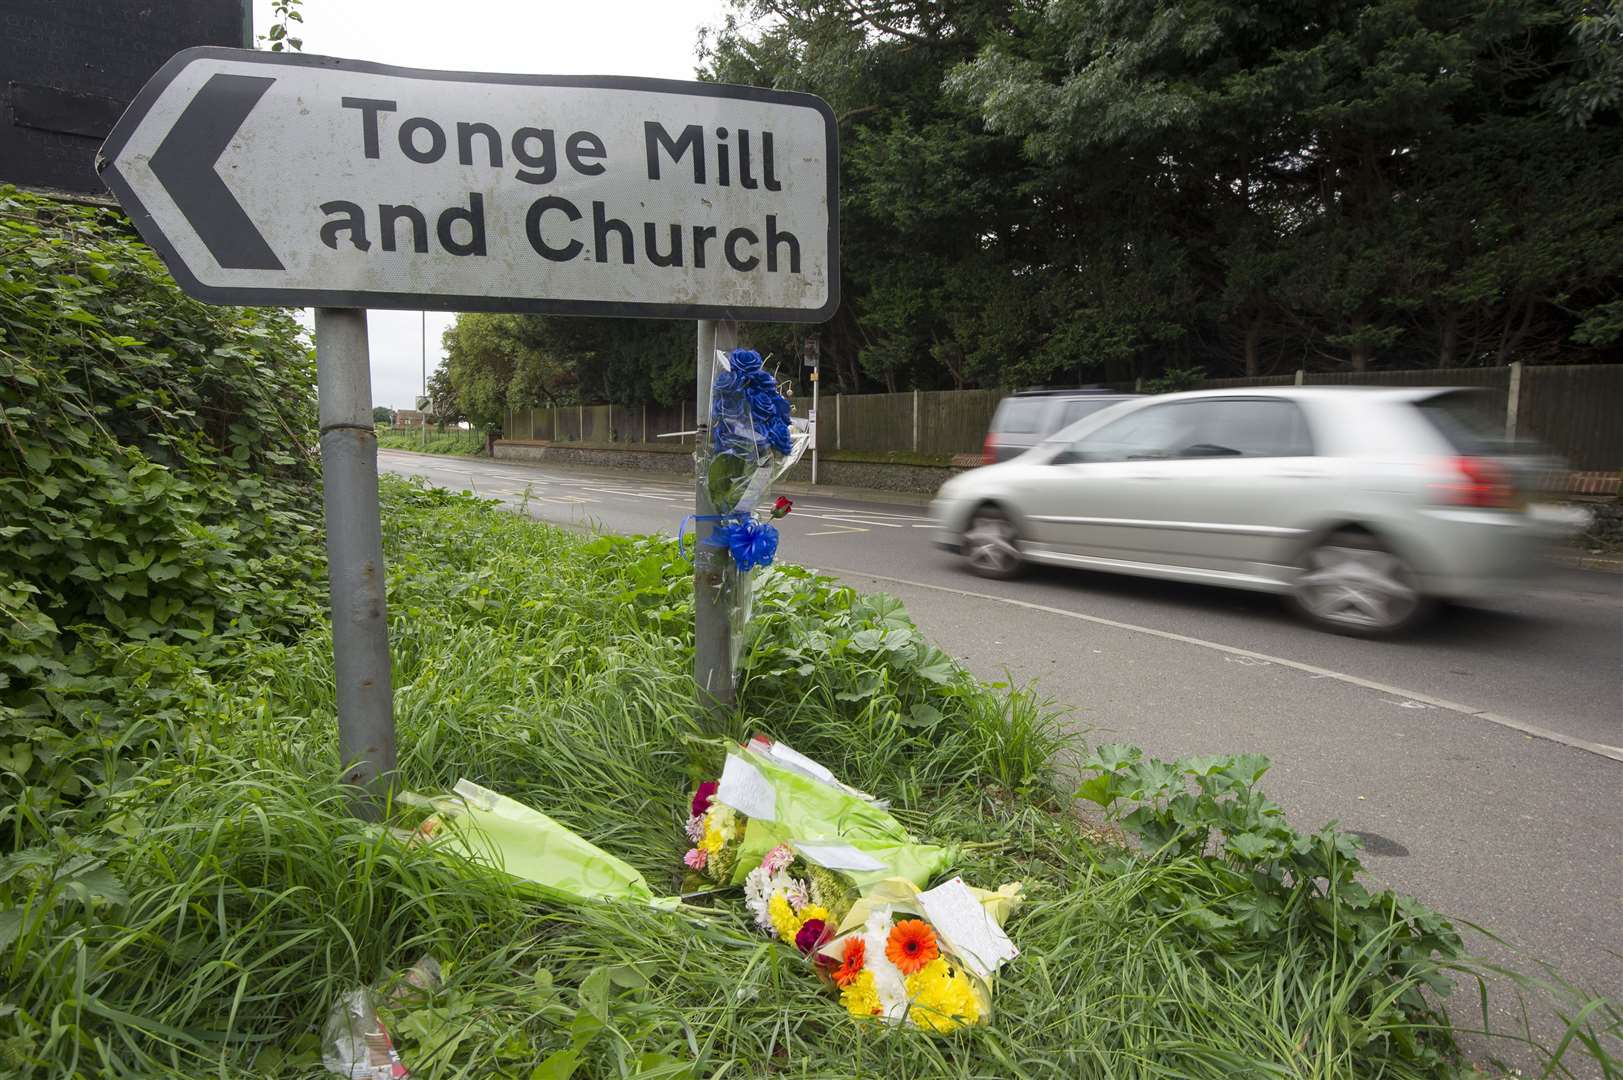 Floral tributes at the scene of a fatal accident in 2015